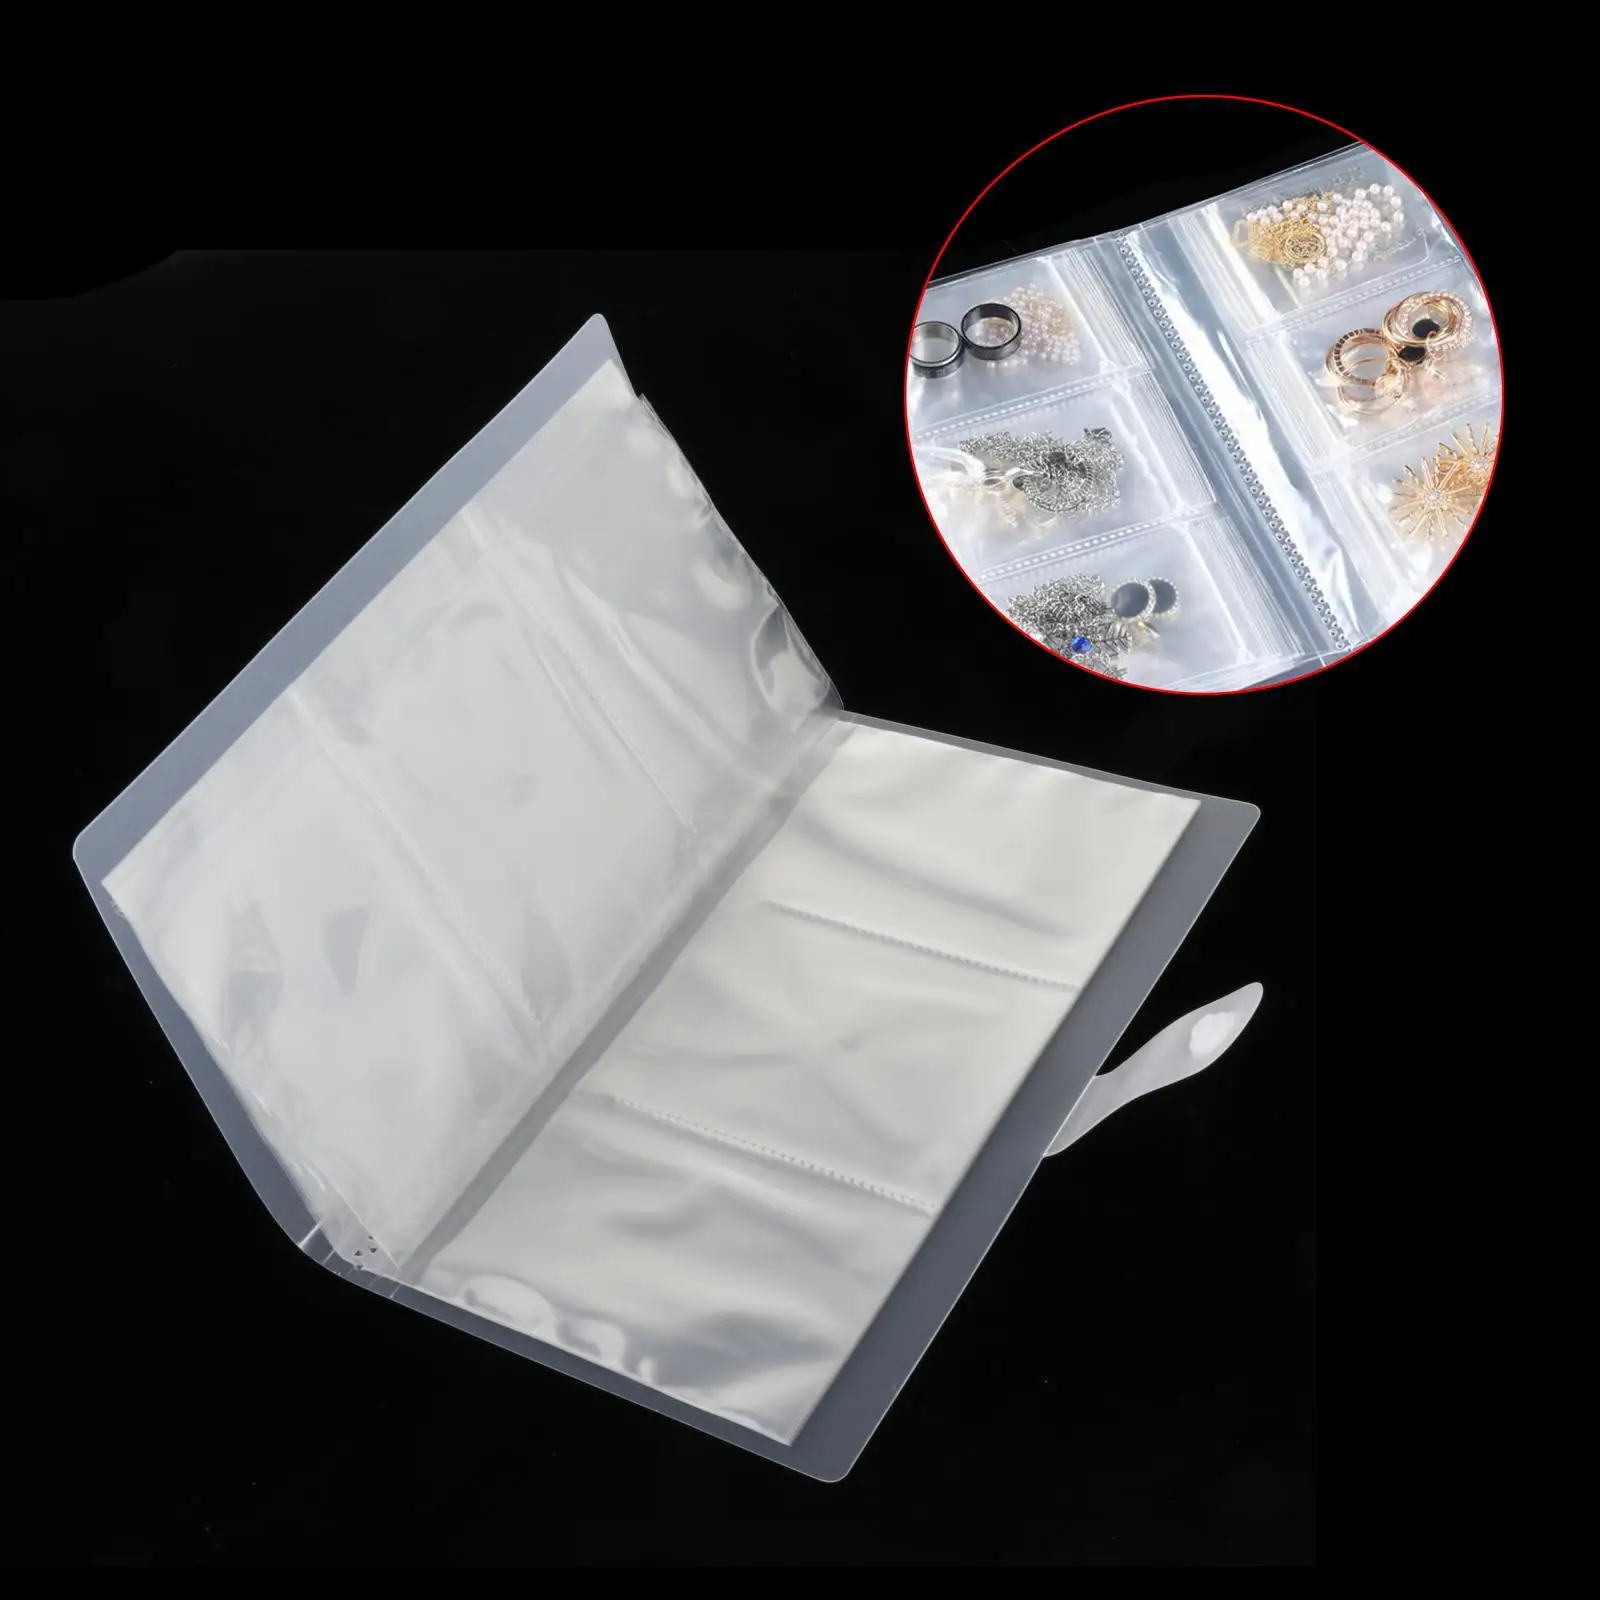 Transparent Jewelry Storage Book with 84 Slots for Storing Necklaces, Bracelets, Earrings Waterproof Card Holder Convenient